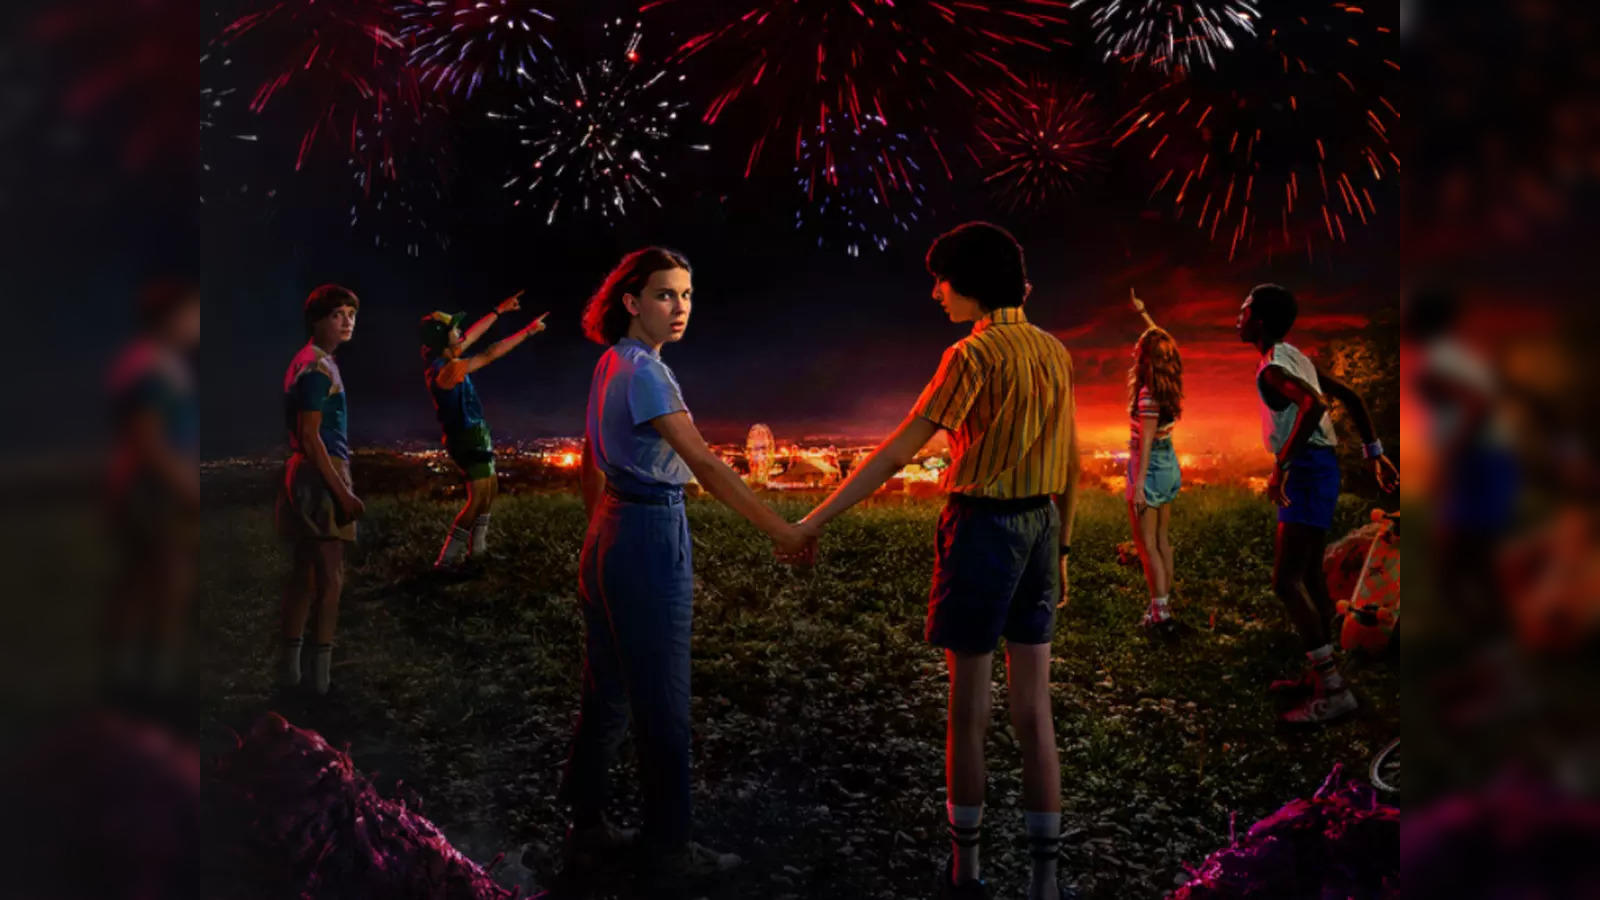 How Will Stranger Things End?